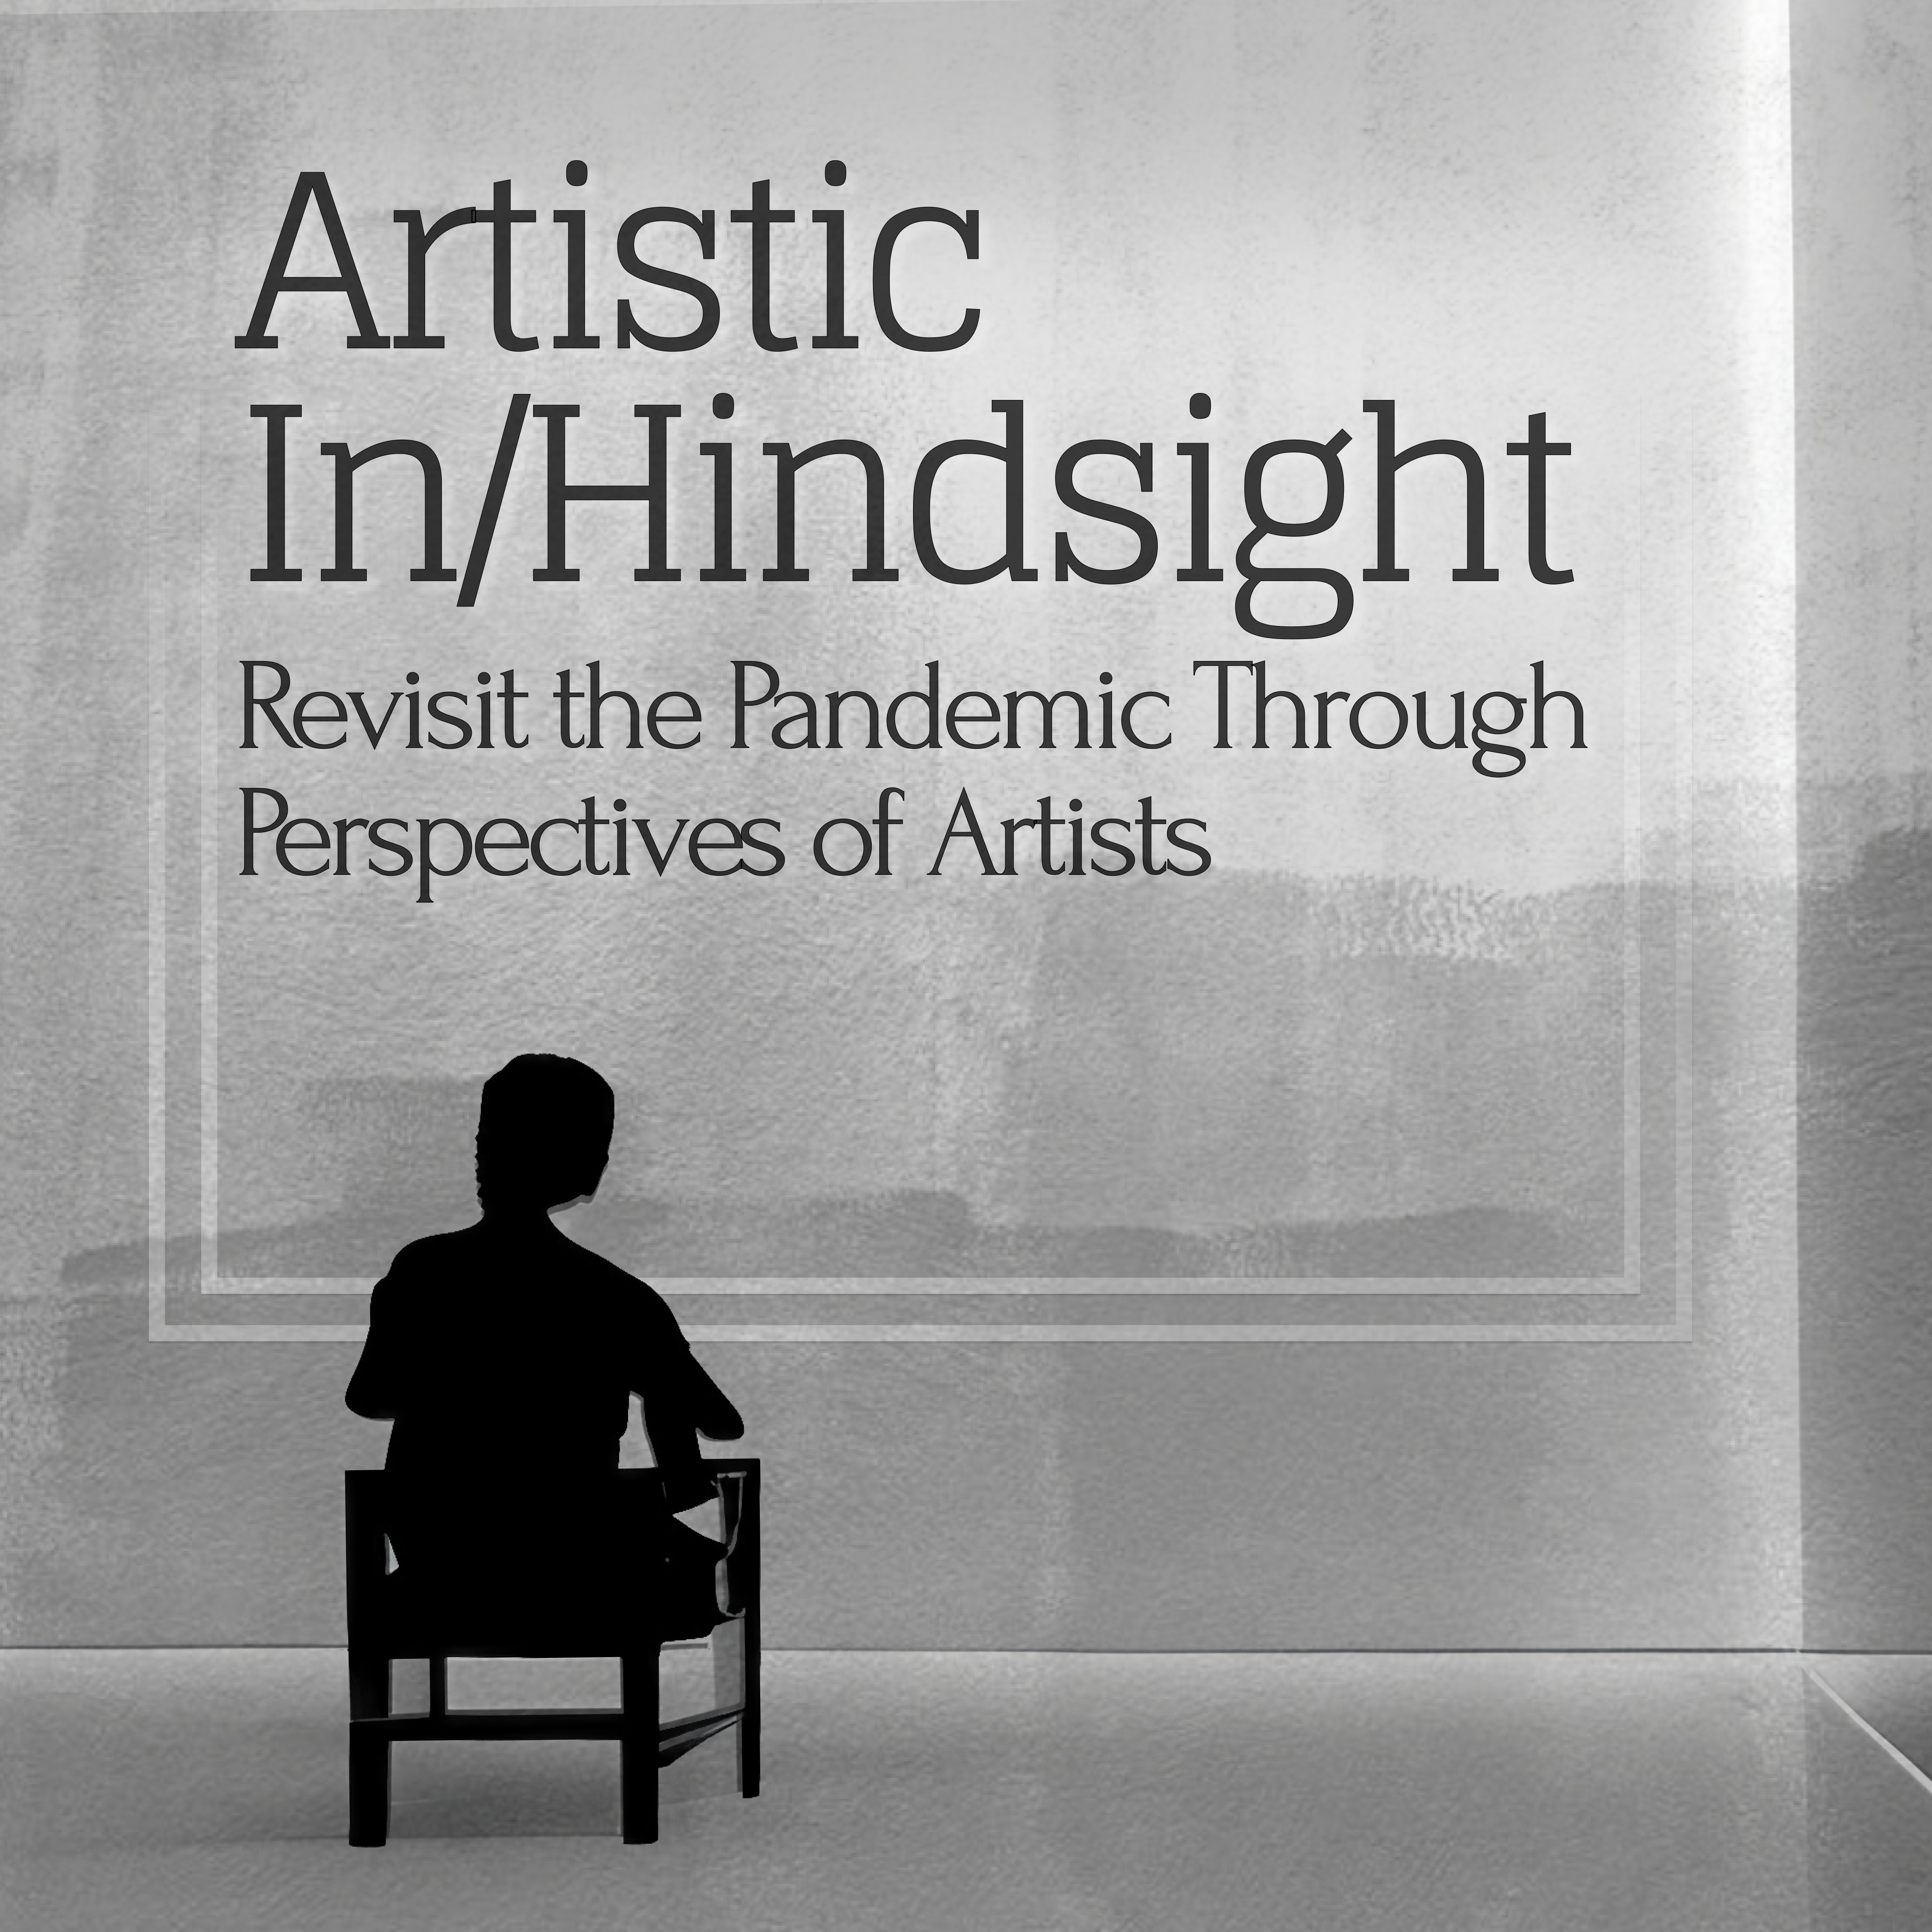 silhouette of a man is sitting on a chair facing a wall of an art gallery. There is a frame hanging on the wall, presenting the title of this exhibition: Artistic In/Hindsight: Revisit the Pandemic Through Perspective of Artists